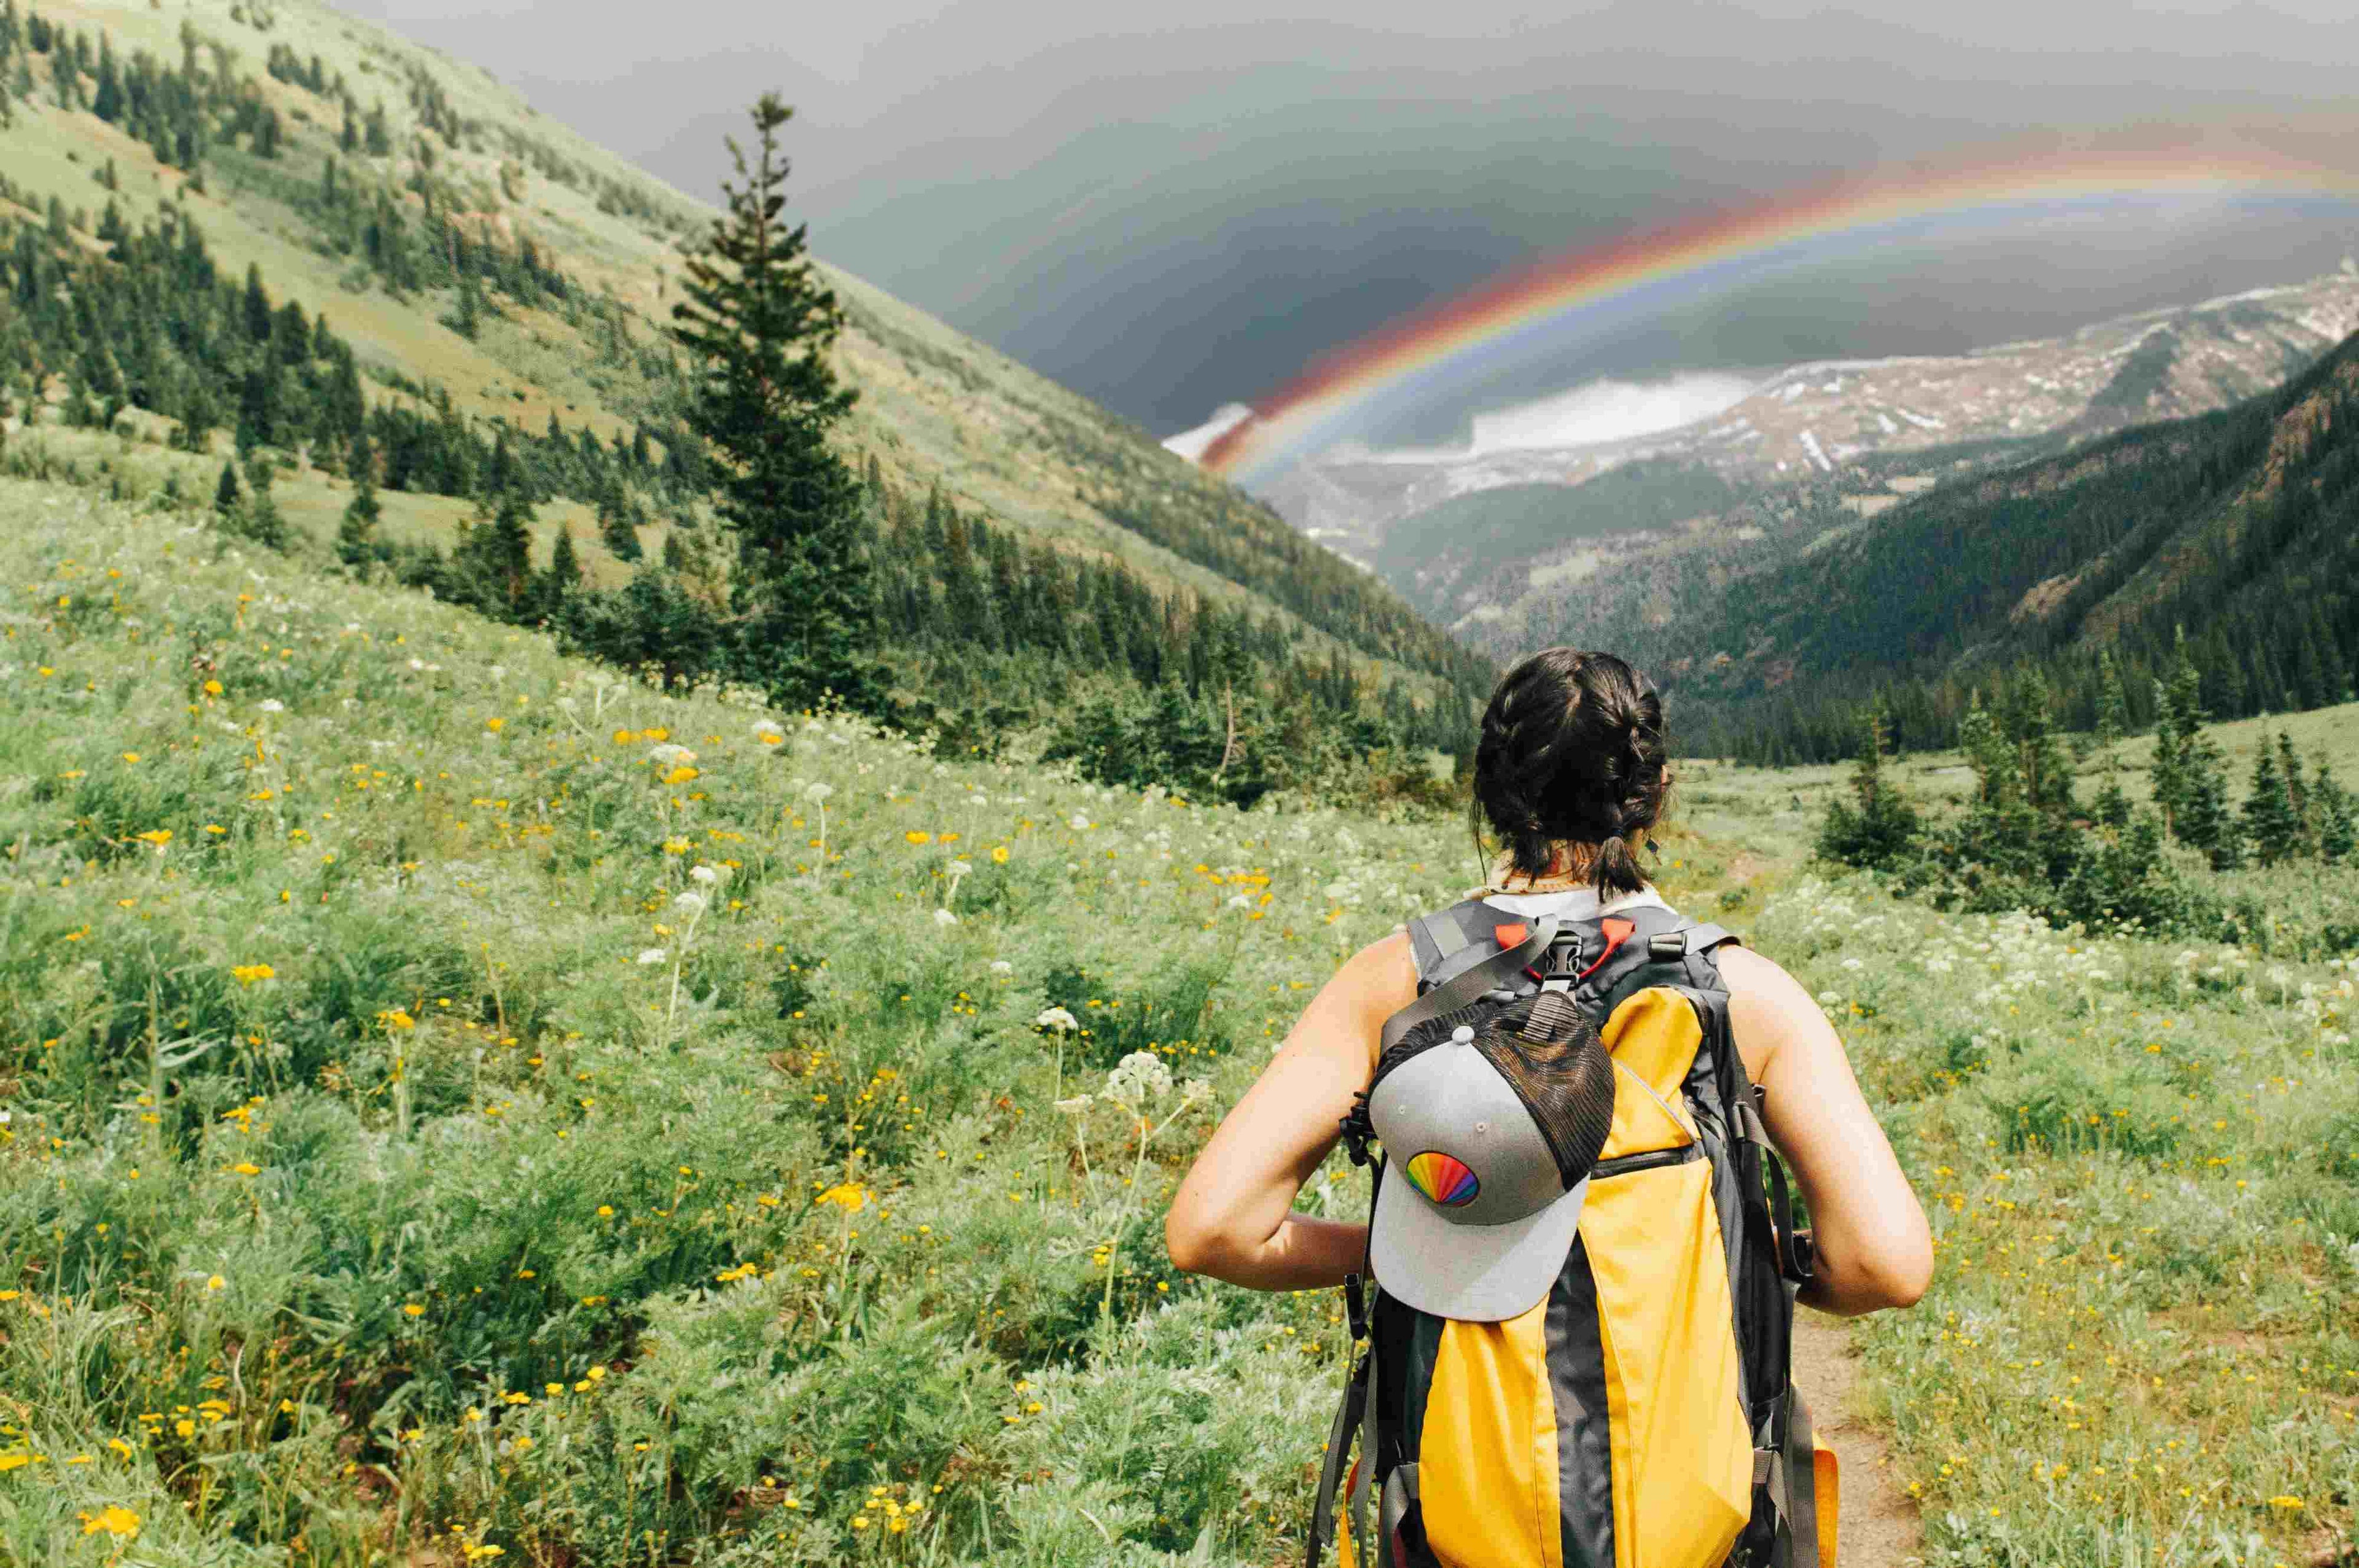 Woman hiking with a rainbow over mountains